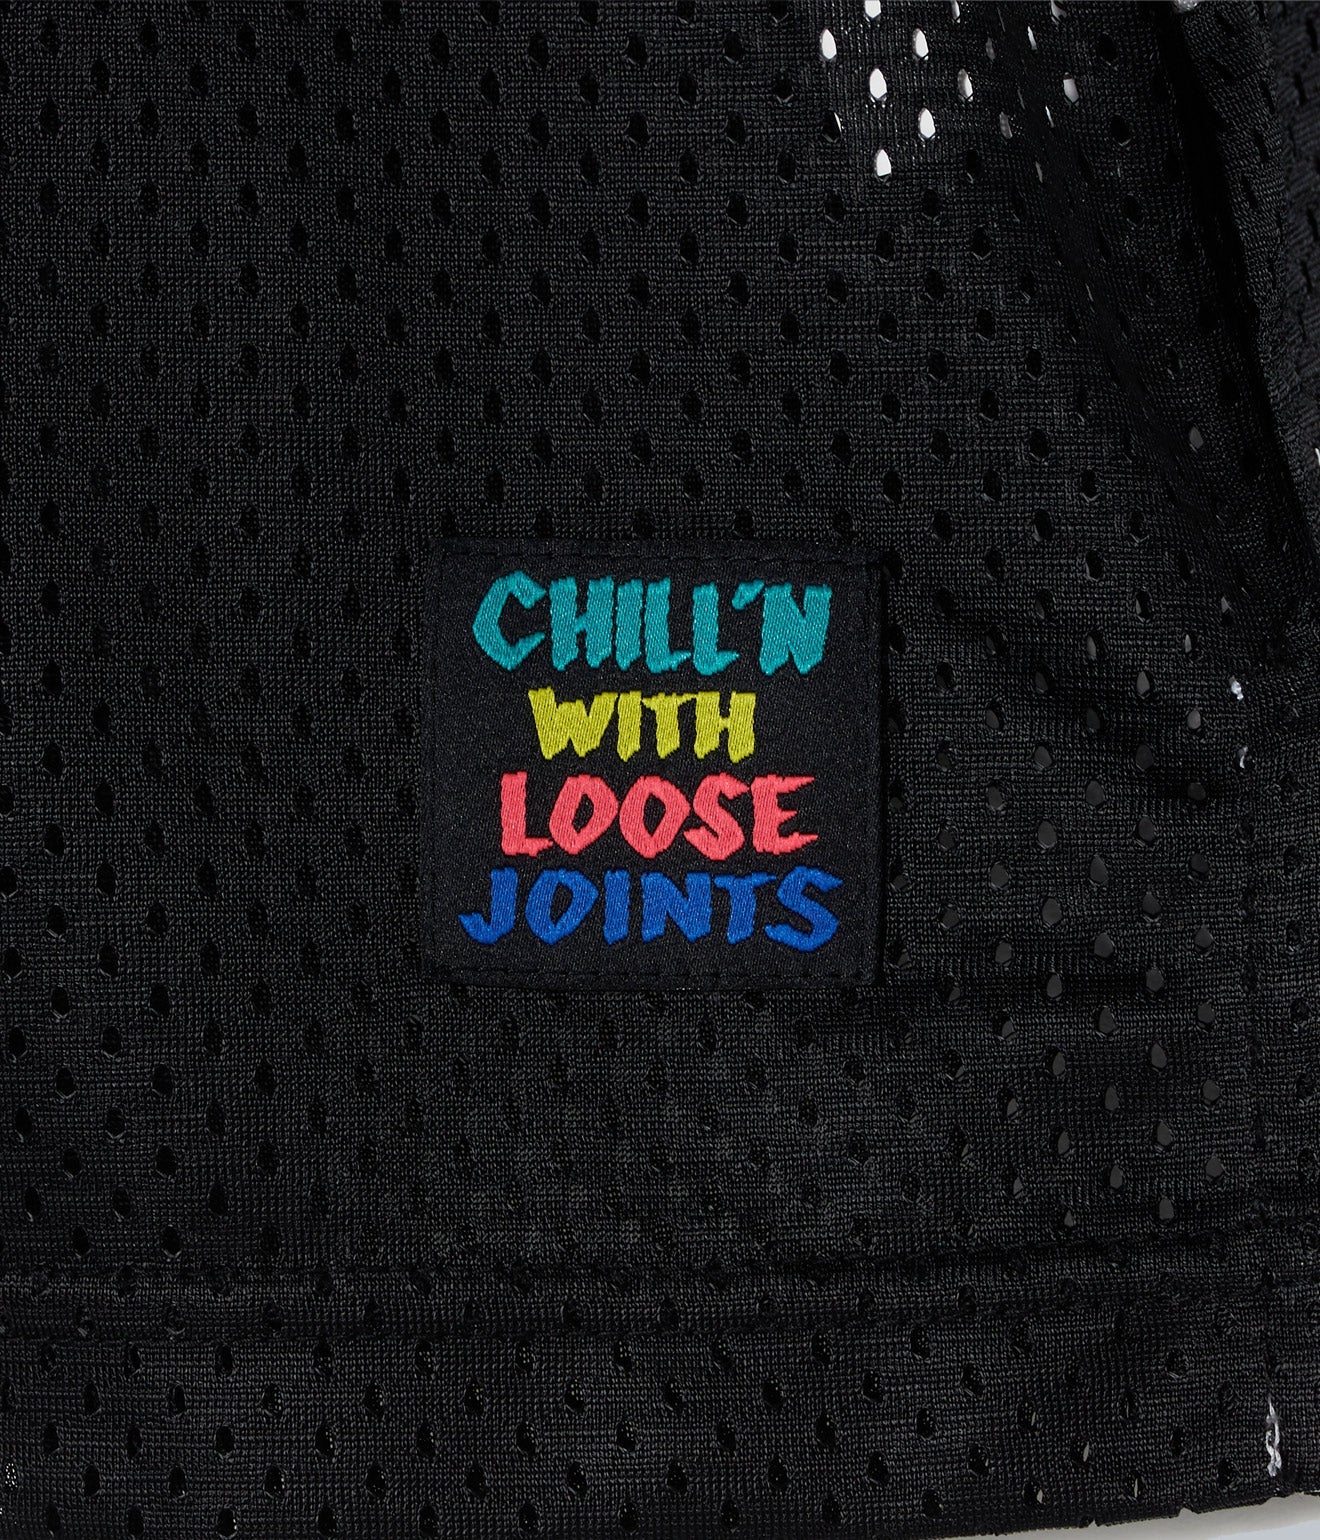 Chill'n with LOOSEJOINTS "CHRIS BIANCHI - 'RAVE' CWL Mesh Shirt" BLK - WEAREALLANIMALS